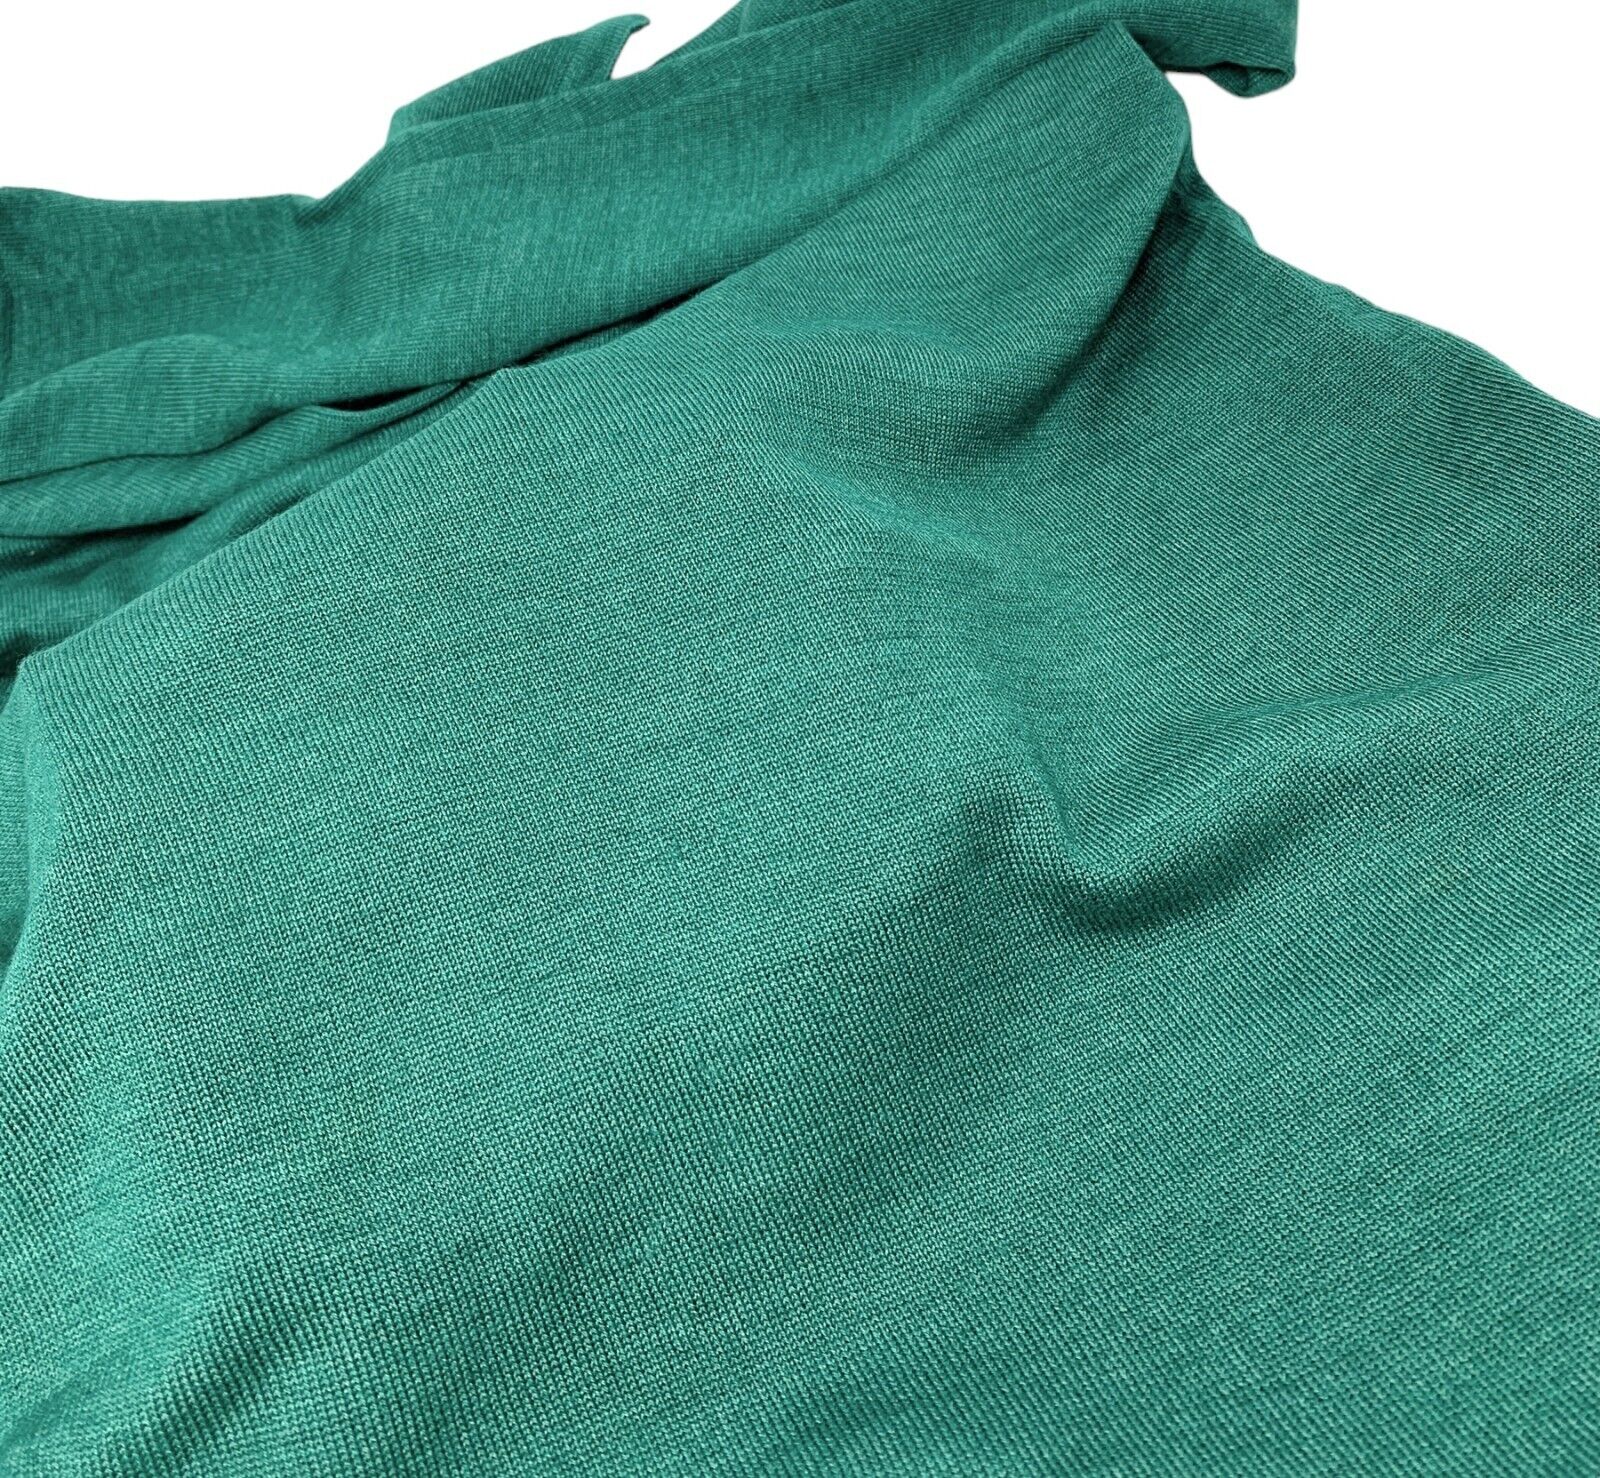 CHANEL Vintage 90s Coco Mark Knit Top #34 Tunic Long Sleeve Green Wool Rank AB